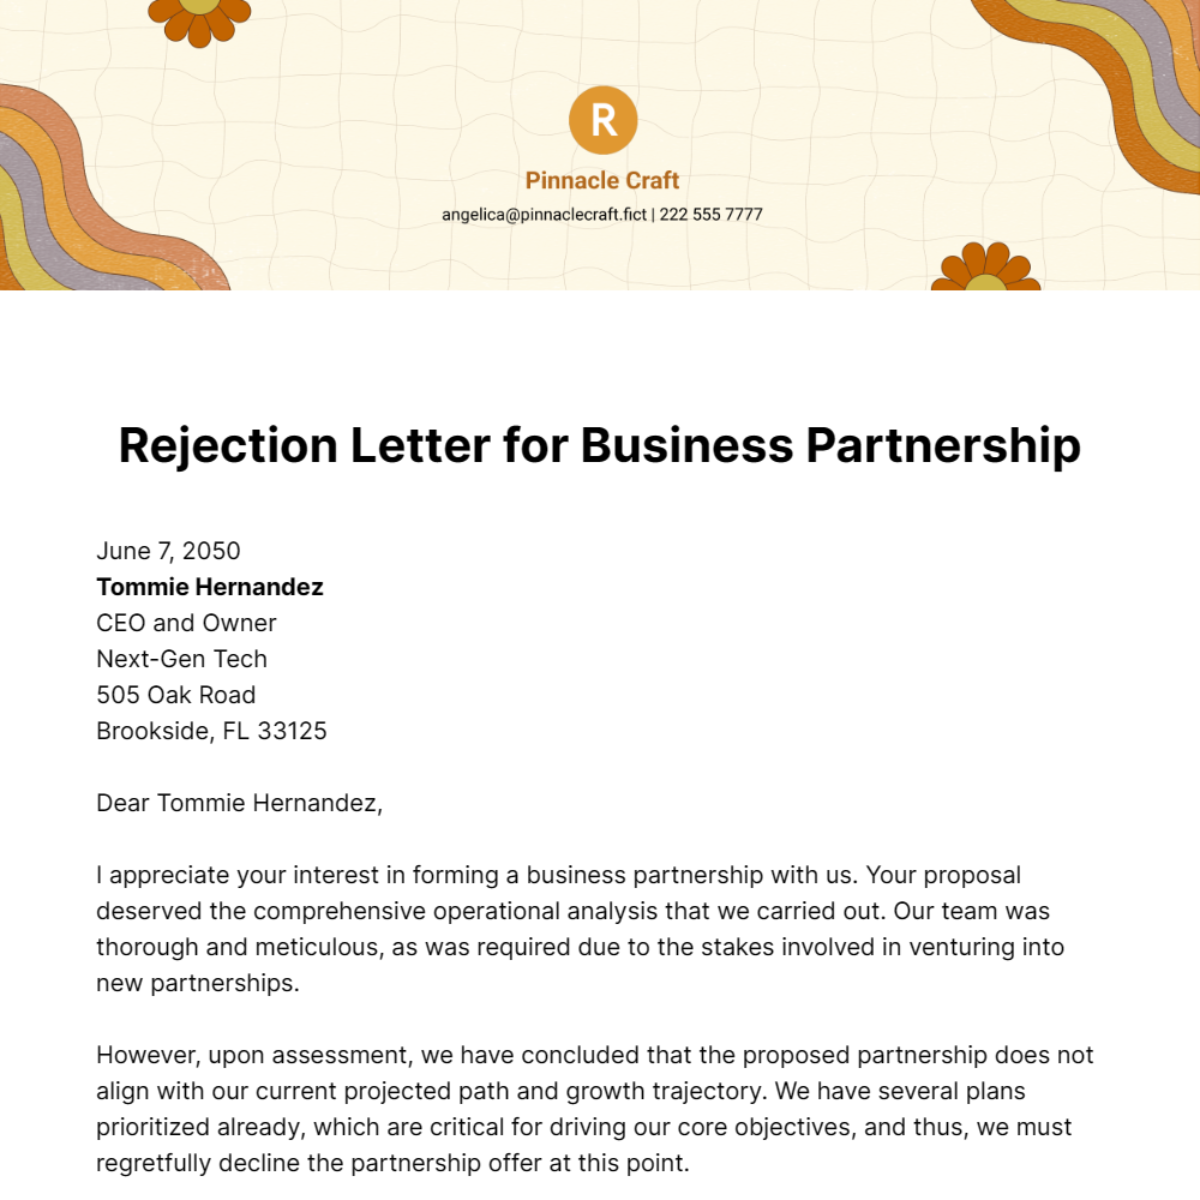 Rejection Letter for Business Partnership Template